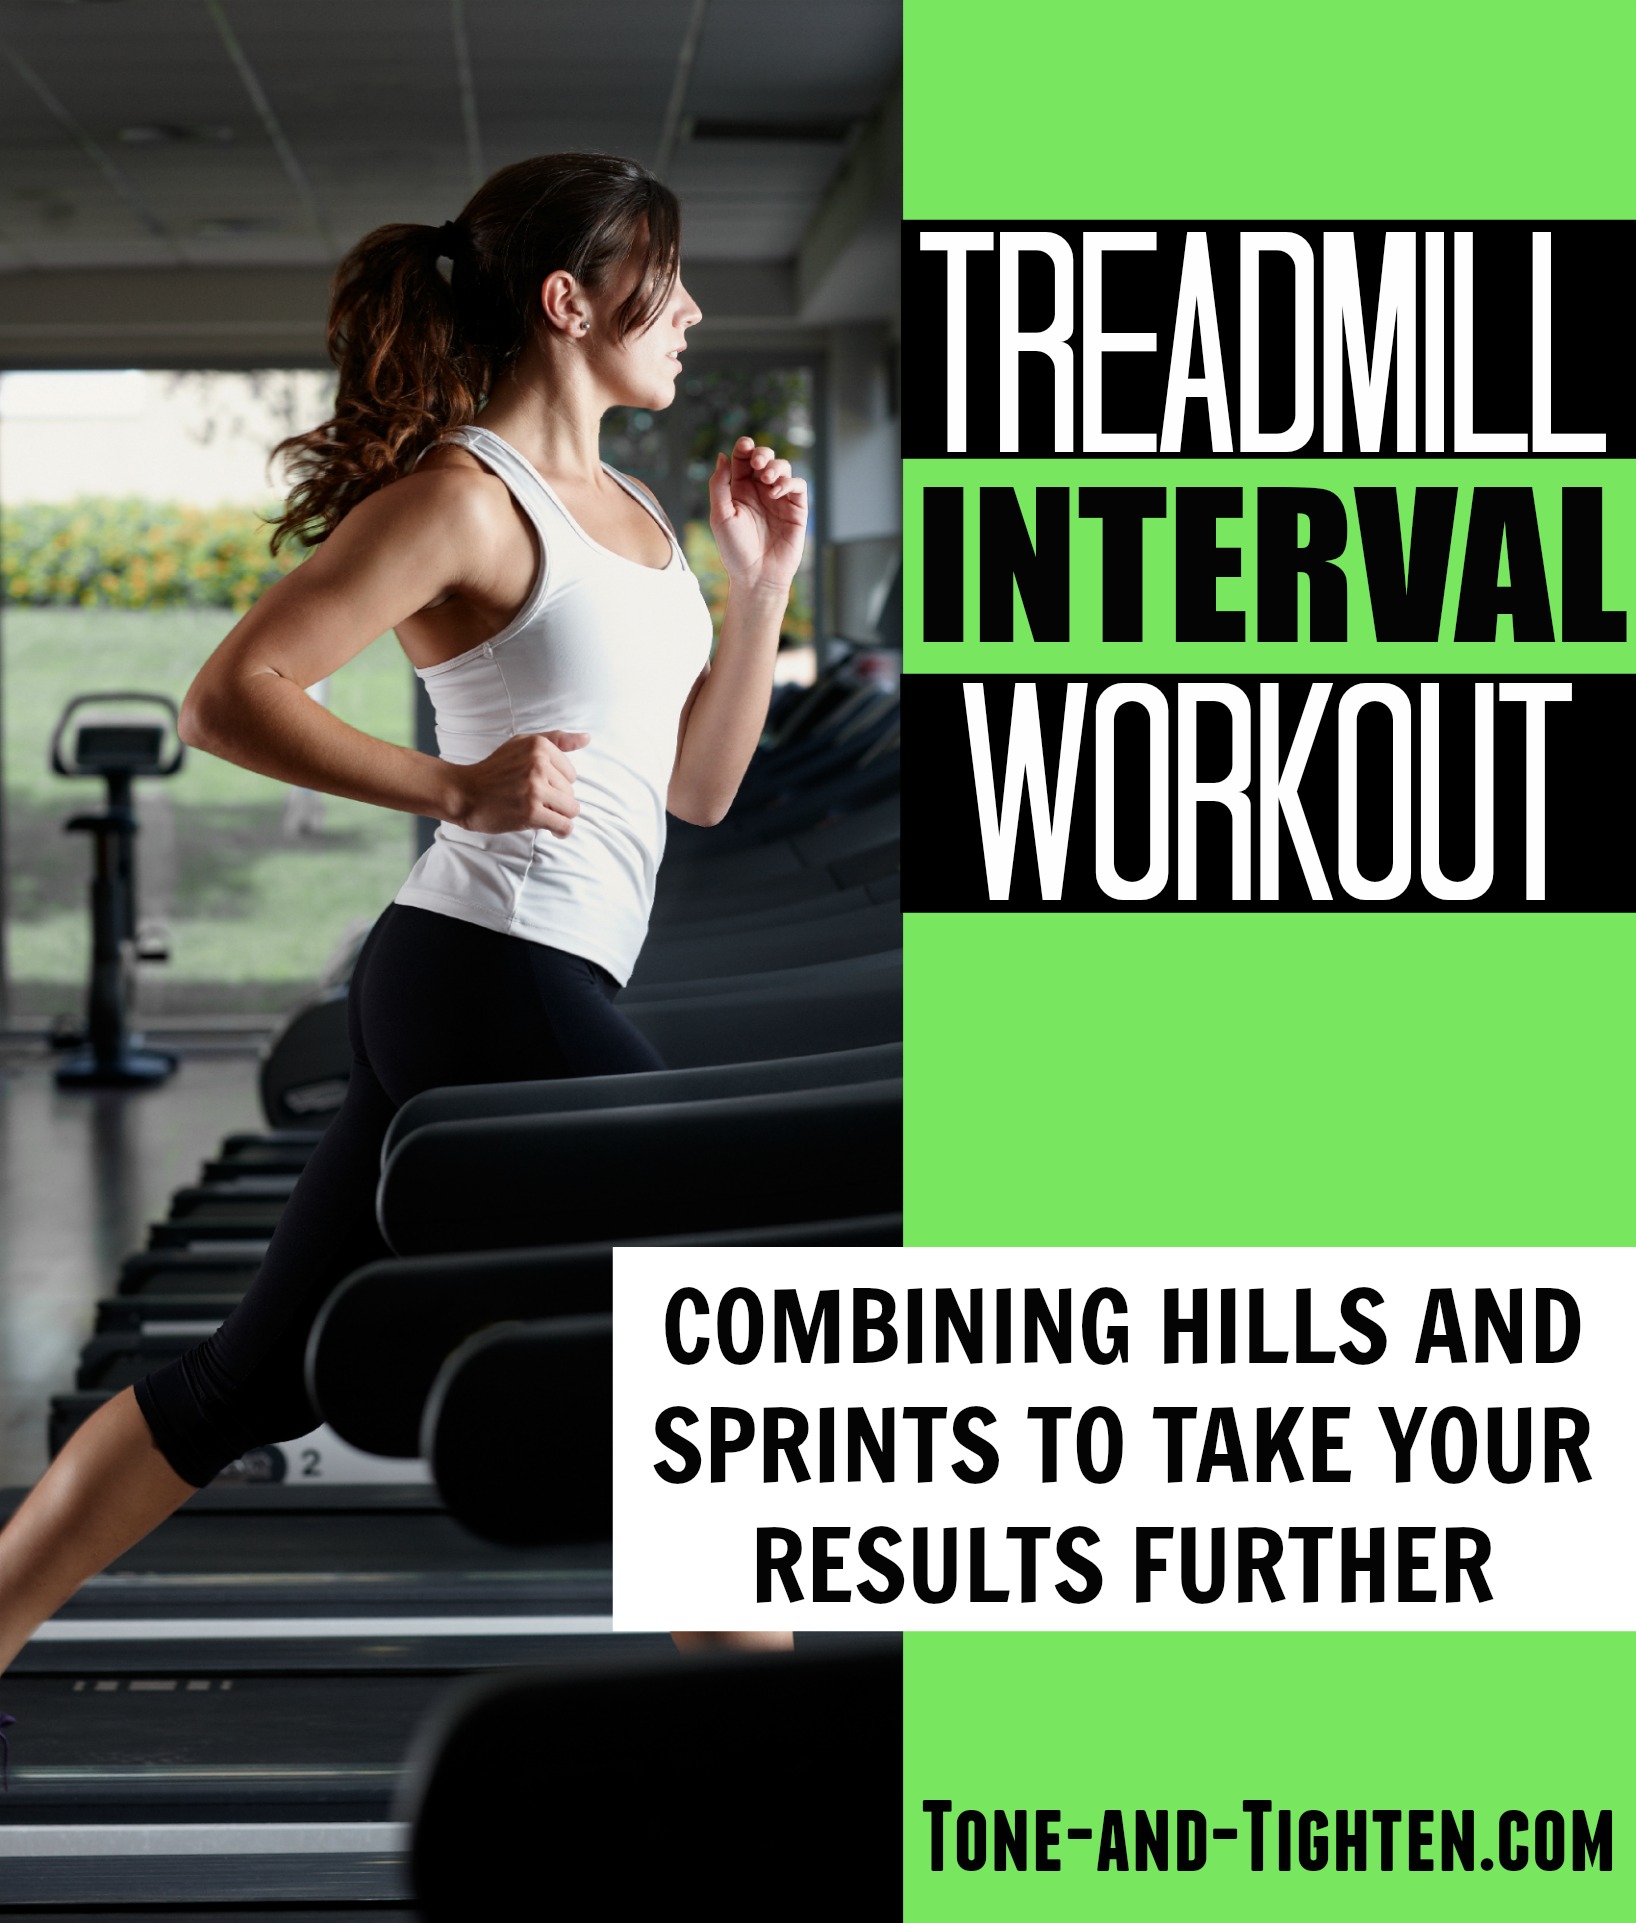 Treadmill Interval Workout With Hills